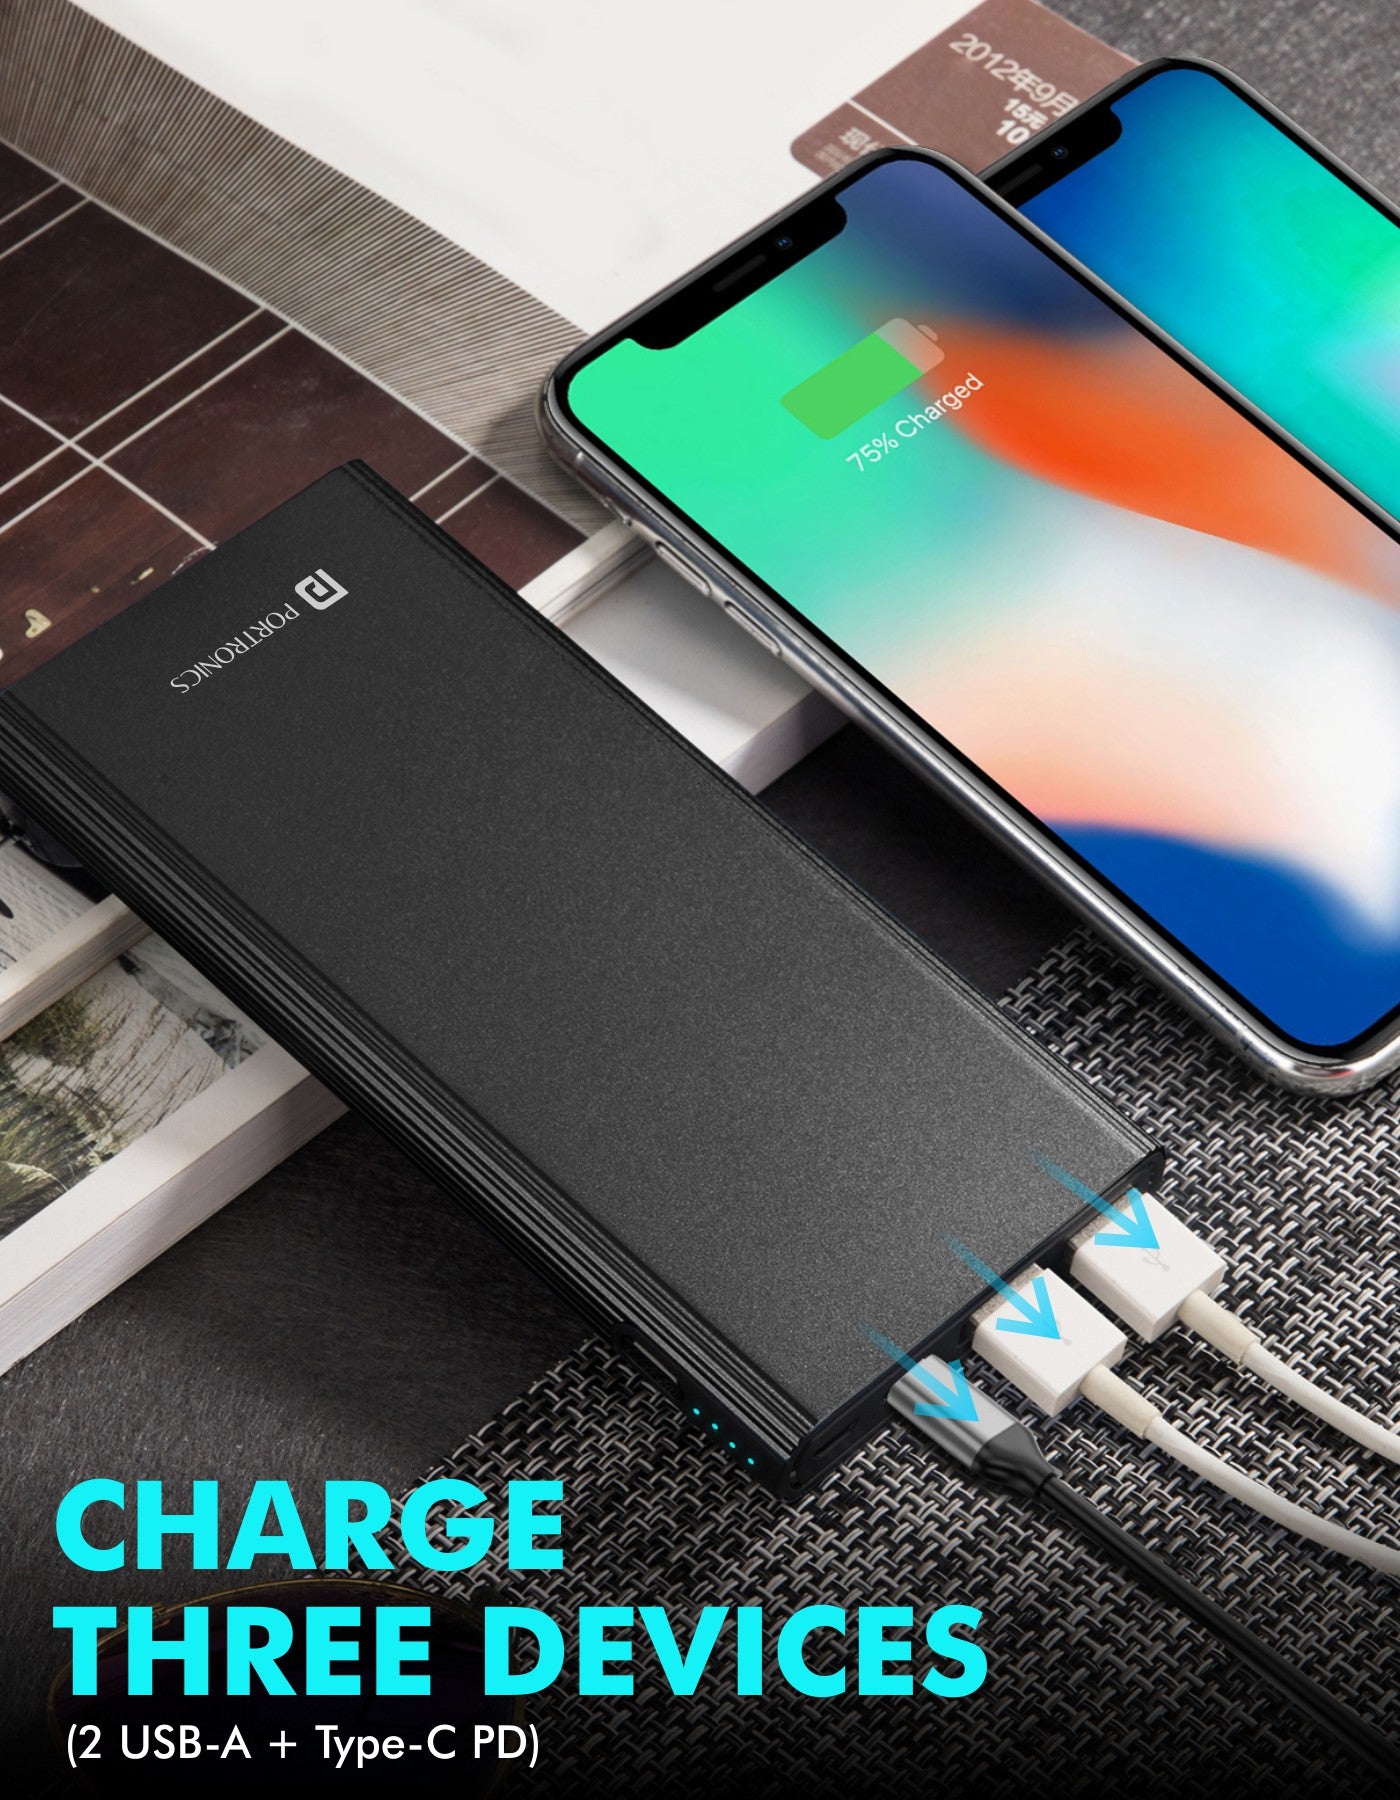 Portronics Power M 20K 20000mah Power bank can charge 3 devices at a time 